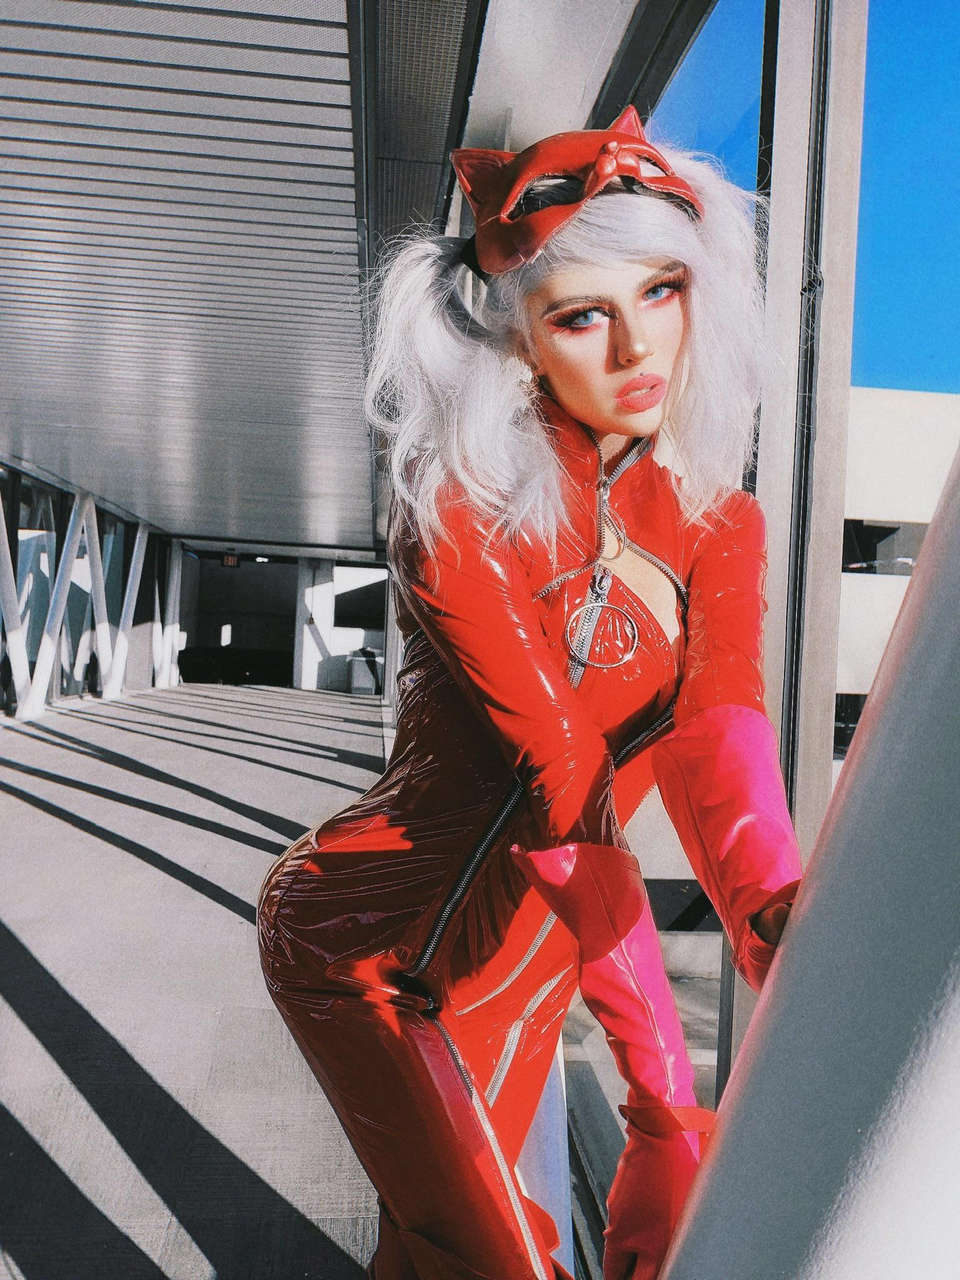 Ann Takamaki From Persona 5 Andlt 3 I Feel So Sexy In This Cospla